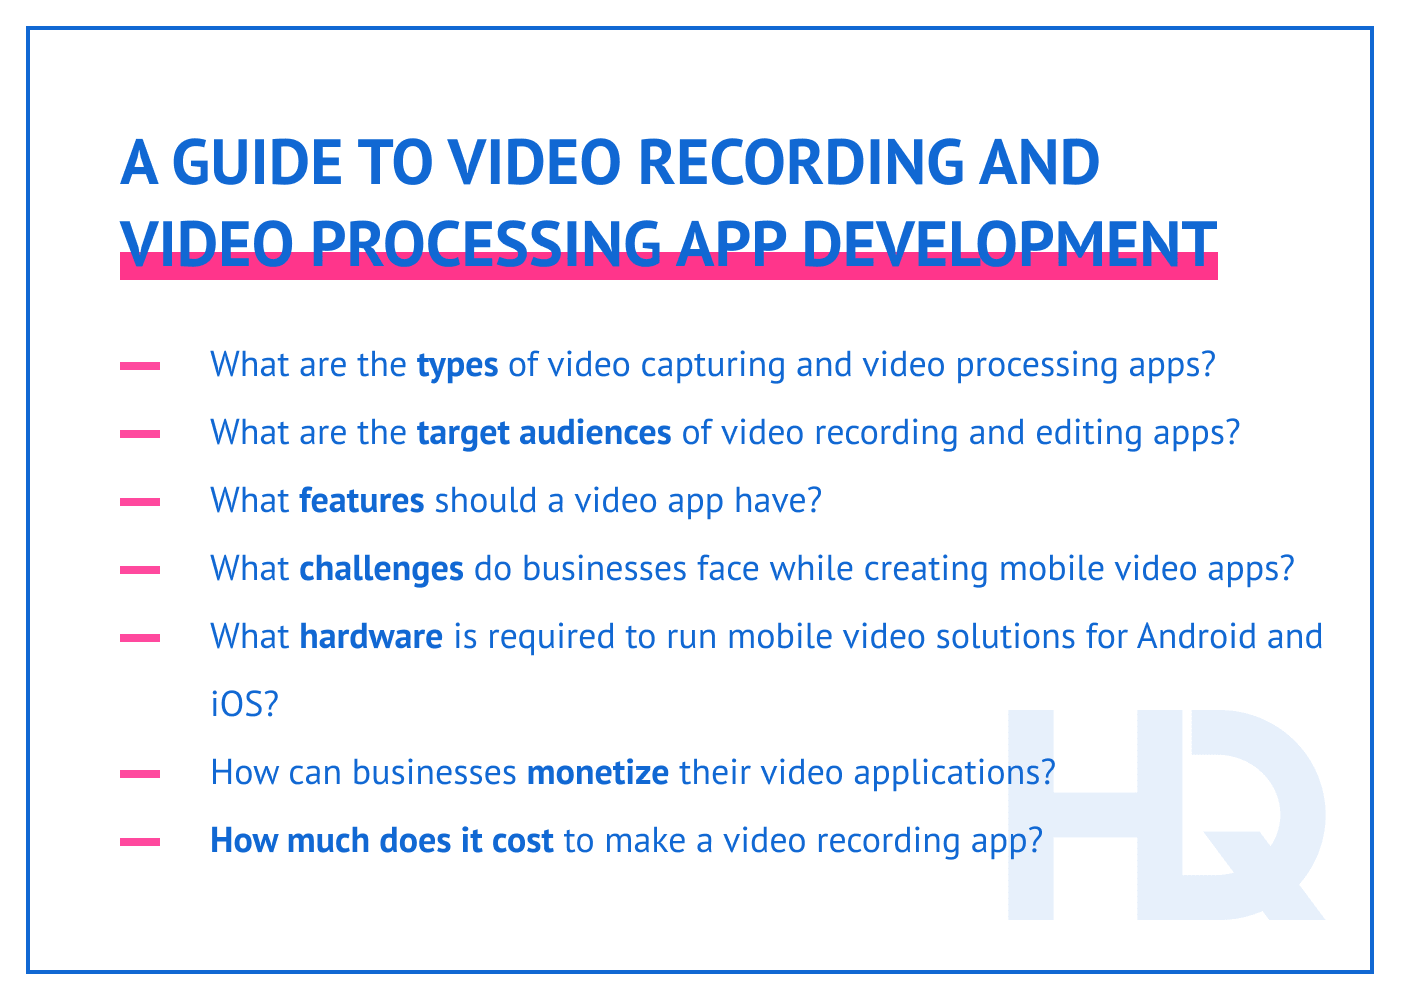 pic 1 min - A Guide to Video Recording and Video Processing App Development